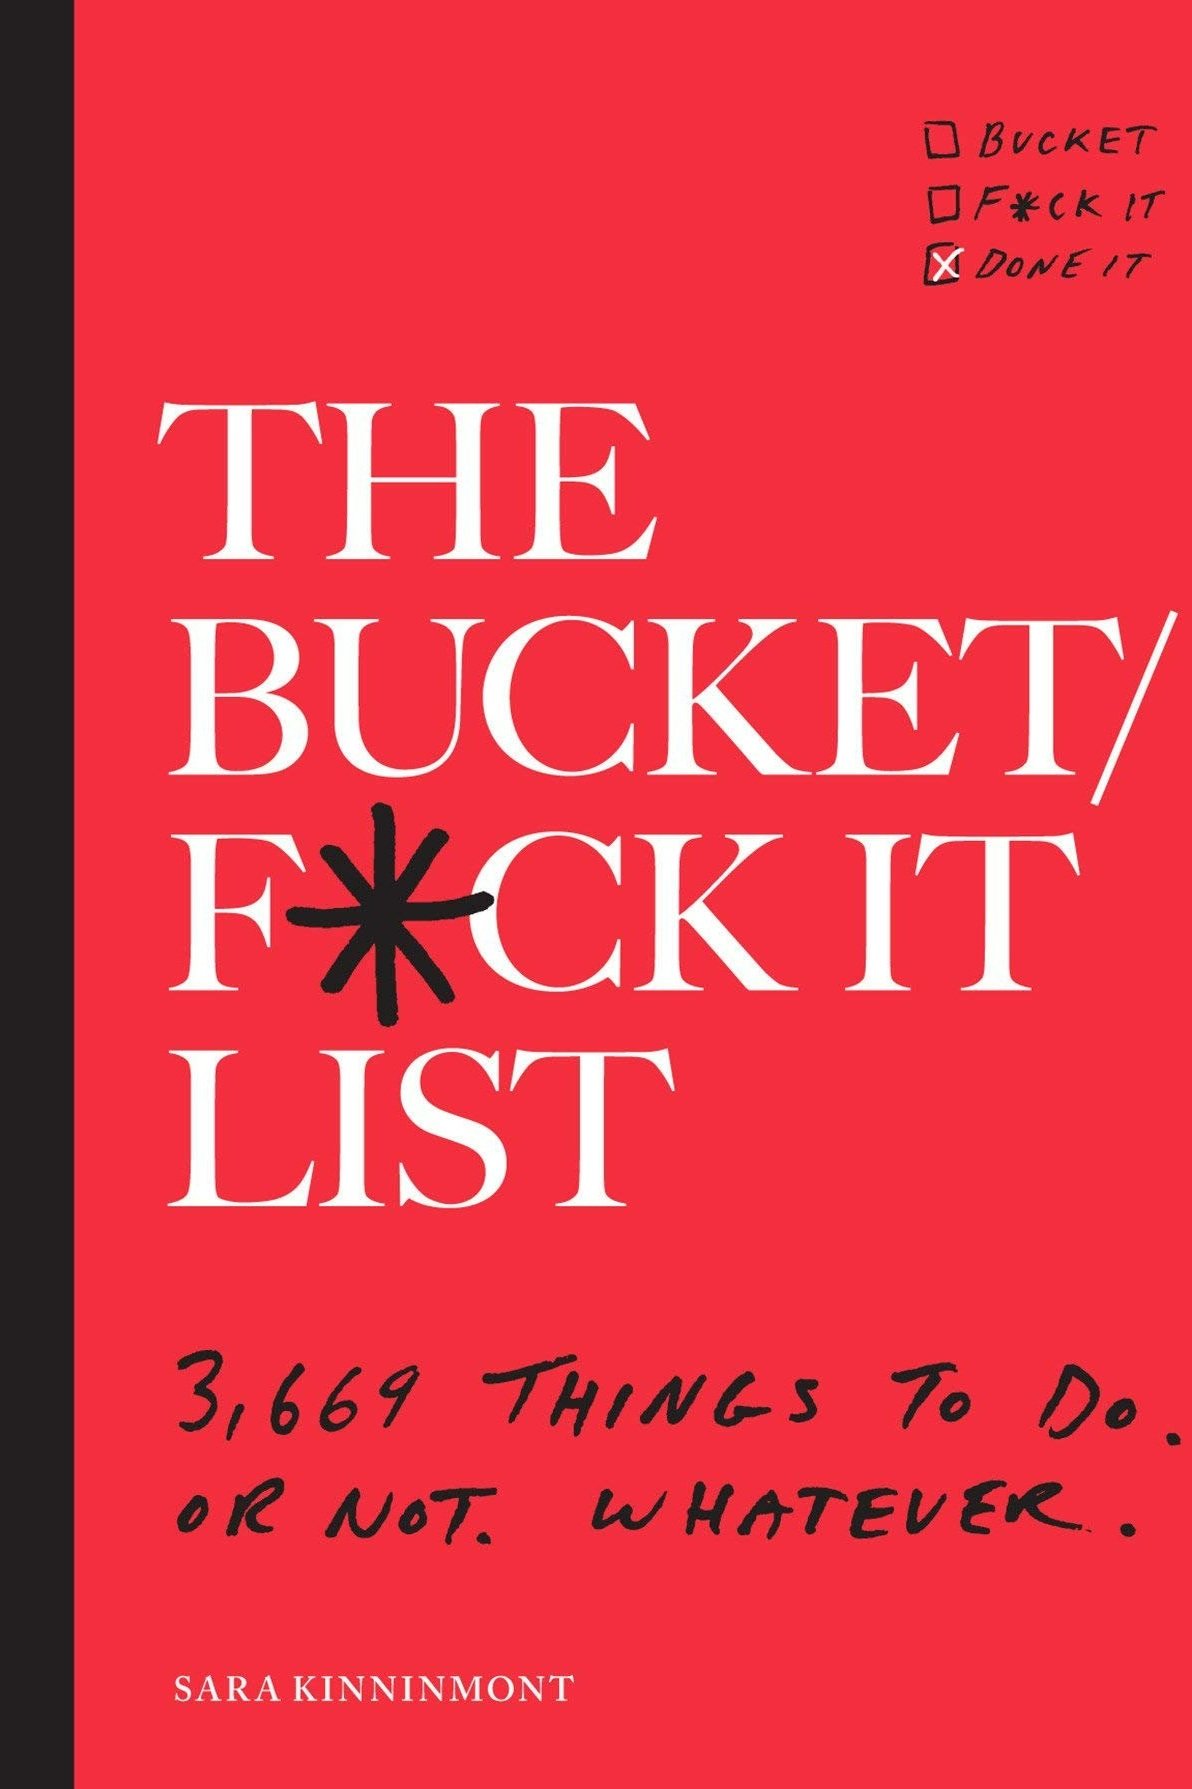 Check off bucket, f*ck it, or done it for each of the 3,669 items.